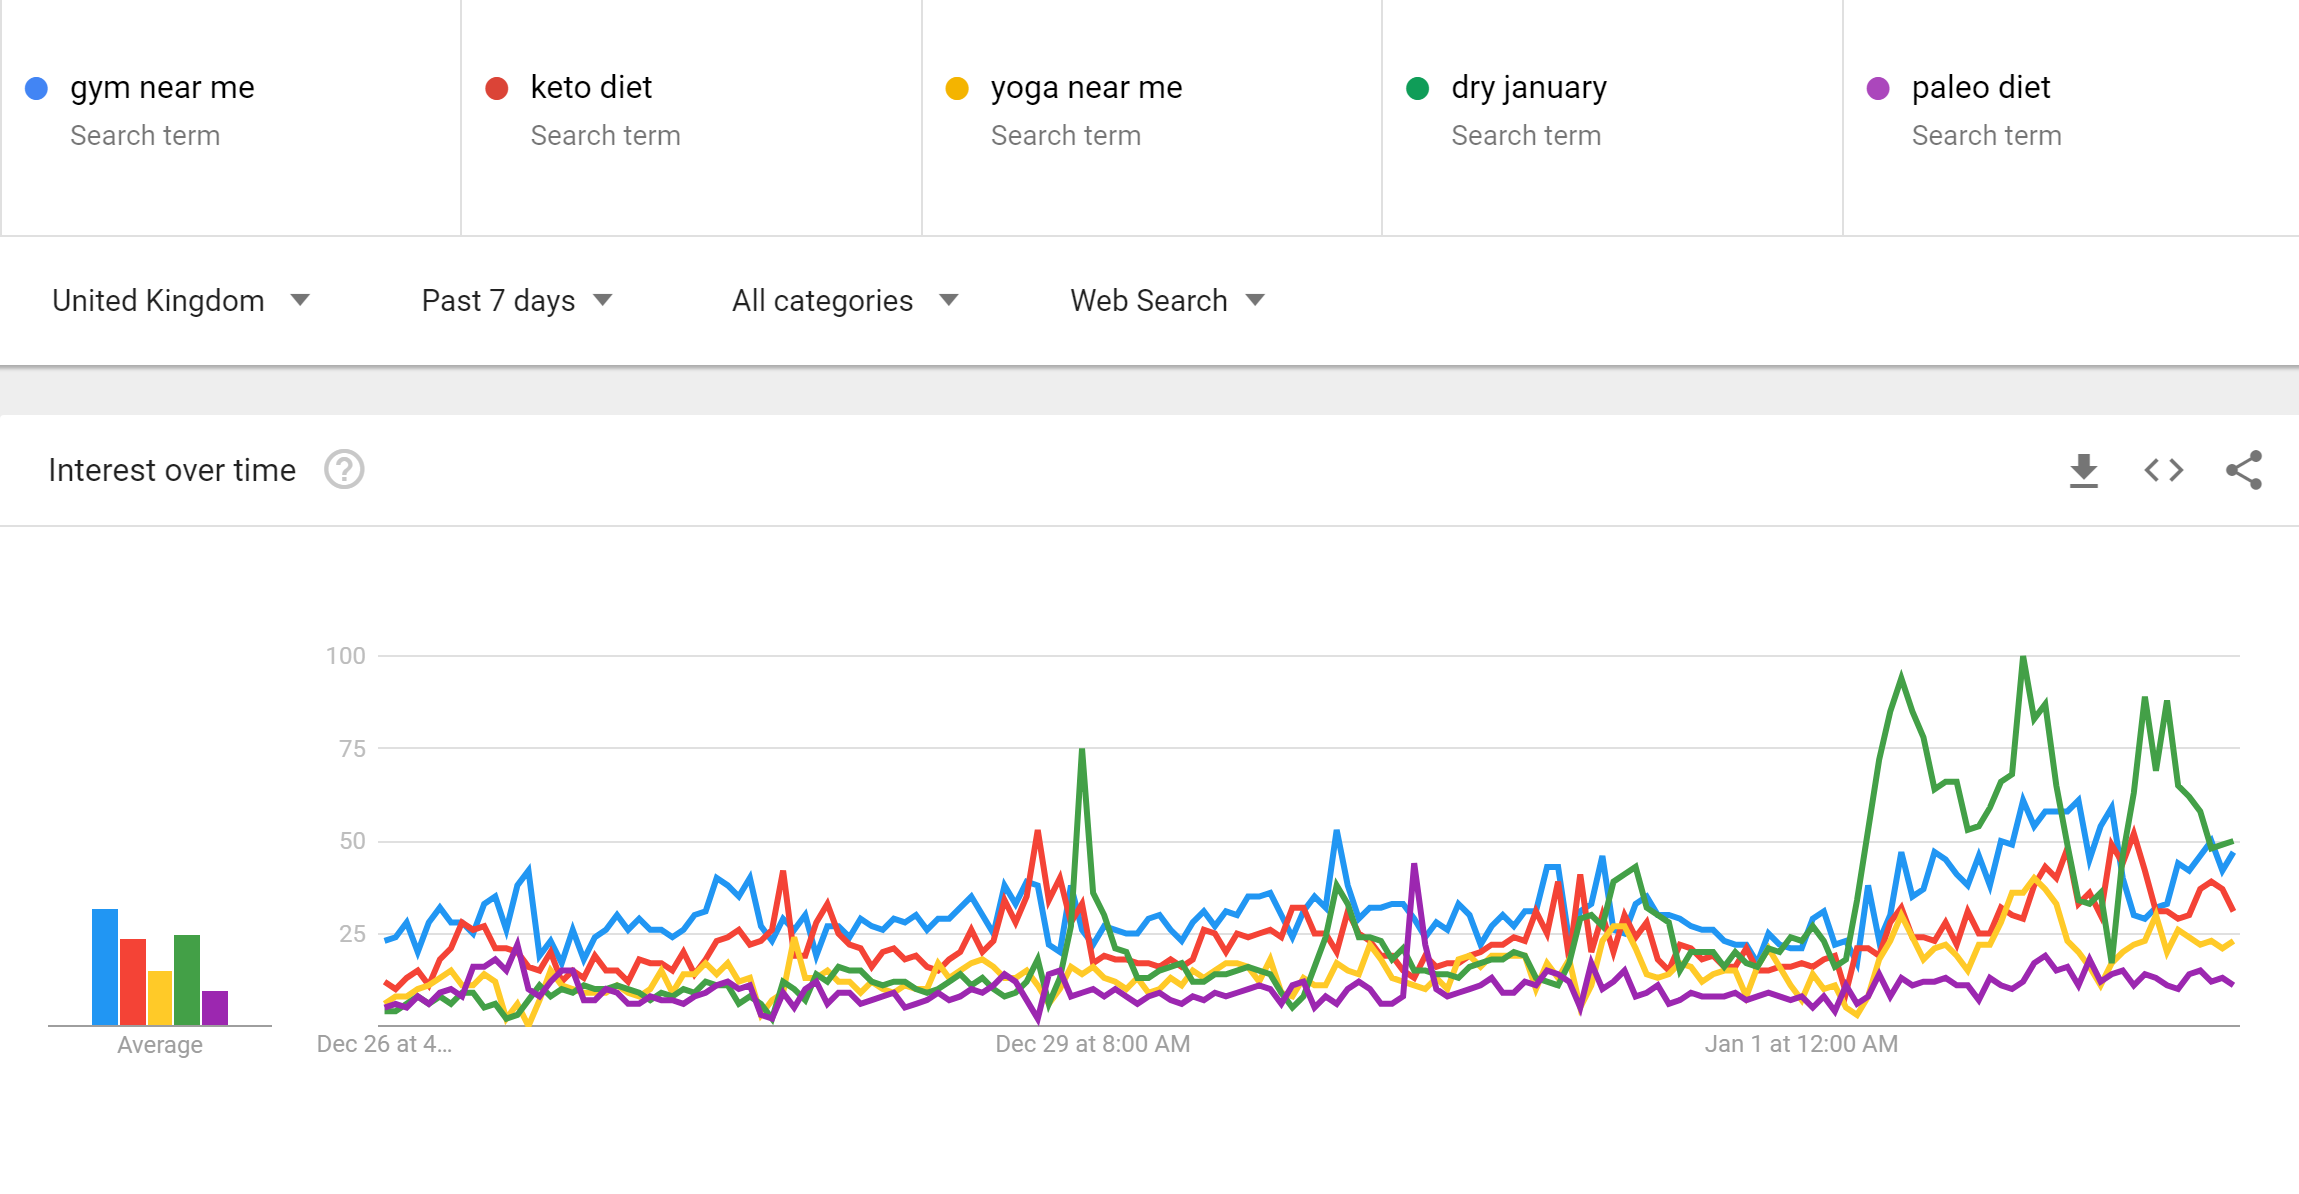 Dry January, the keto diet, the paleo diet and exercise were among the most popular search terms for new year's resolutions